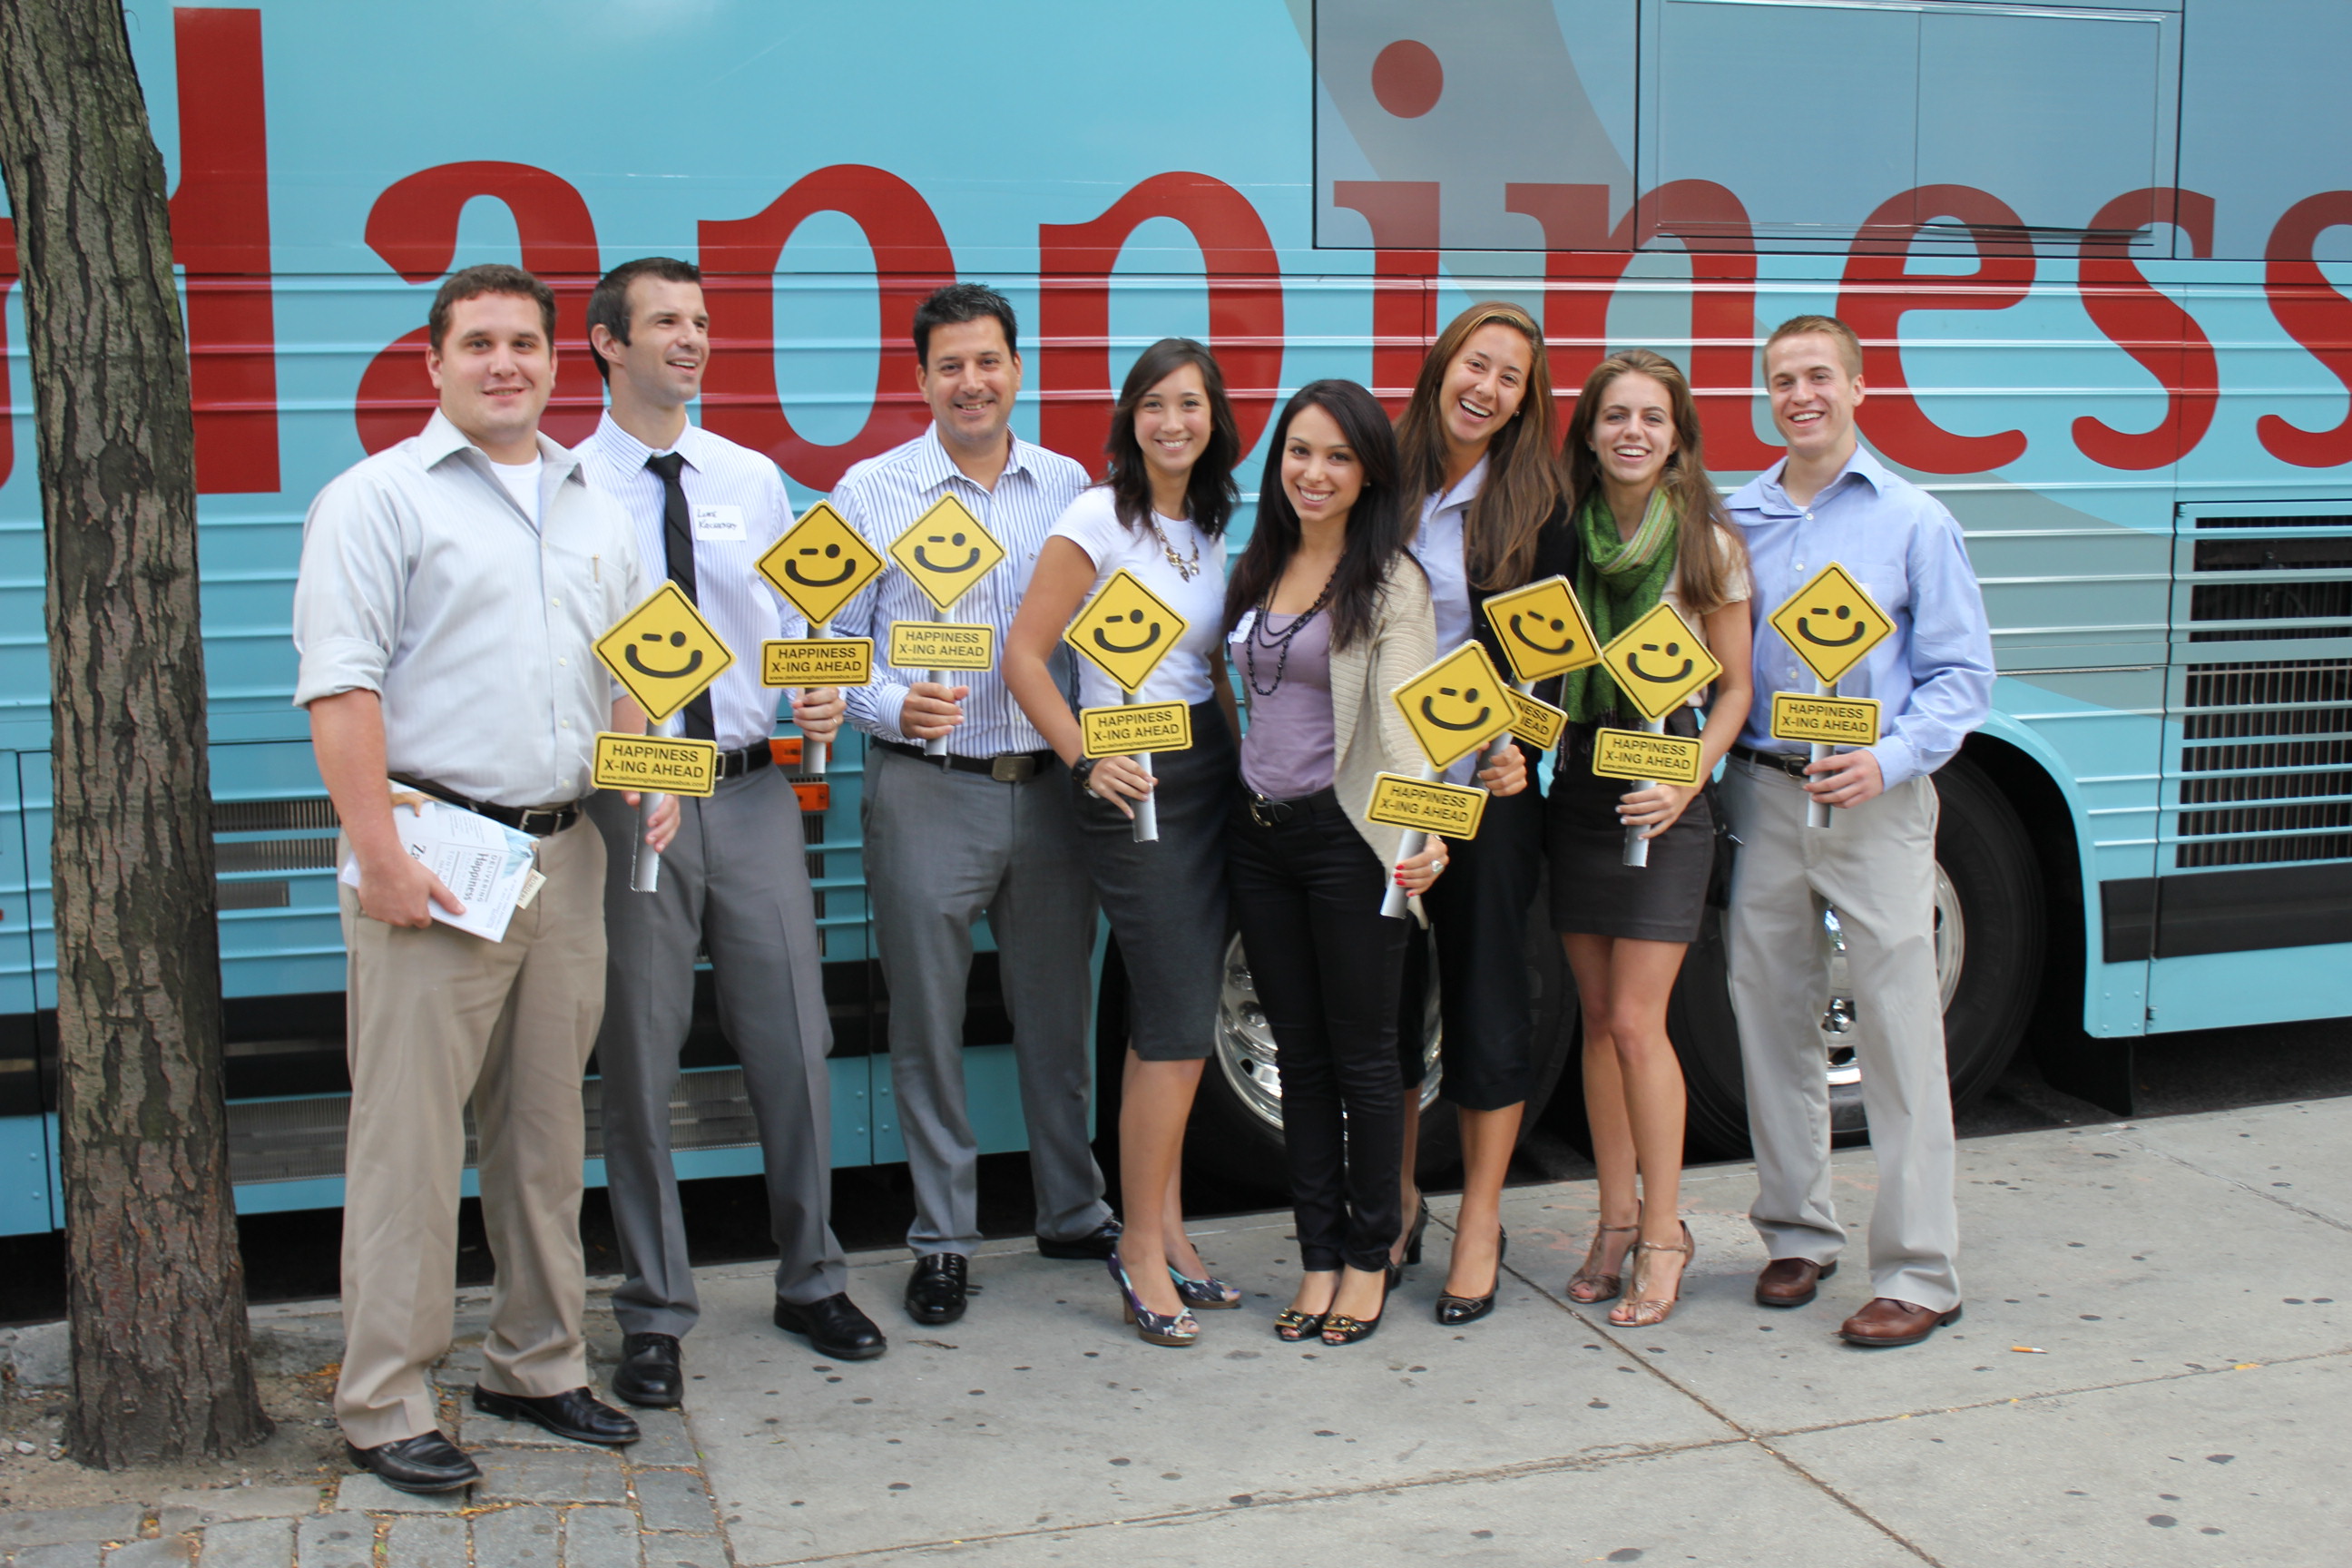 The Happines Bus Working Its Magic on CBA Students